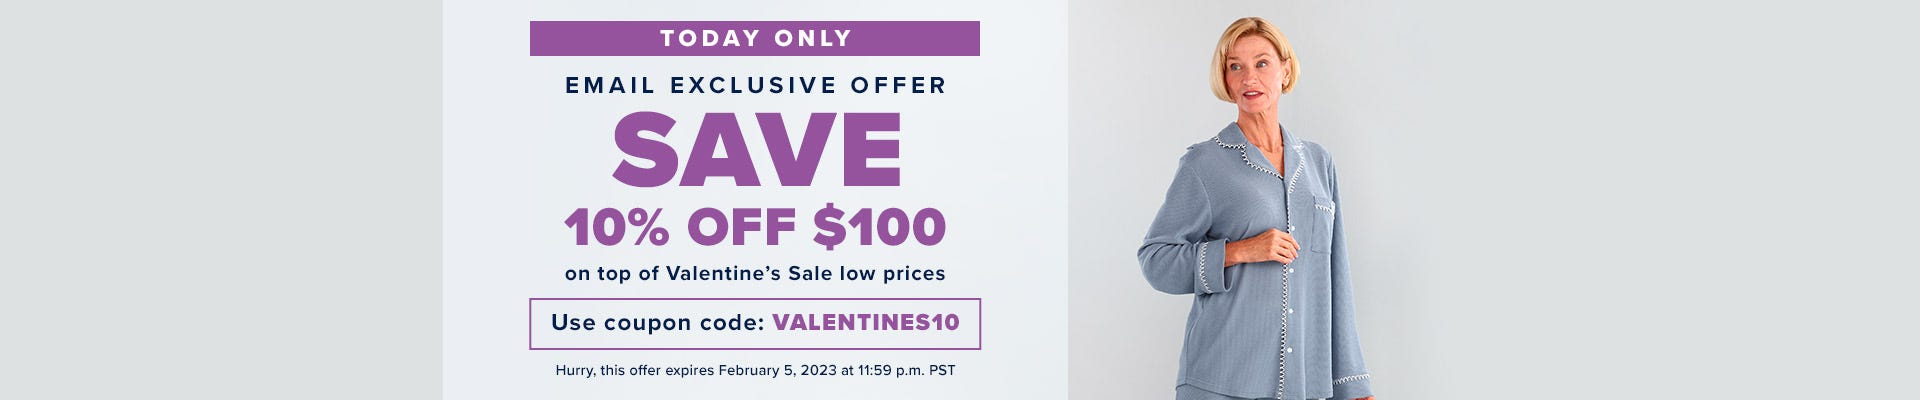 Today Only - Email Exclusive Offer - Save: 10% off $100 on top of Valentine's Sale low prices - Use coupon code: VALENTINES10at checkout - Hurry, this offer expires February 5, 2023 at 11:59 p.m. PST